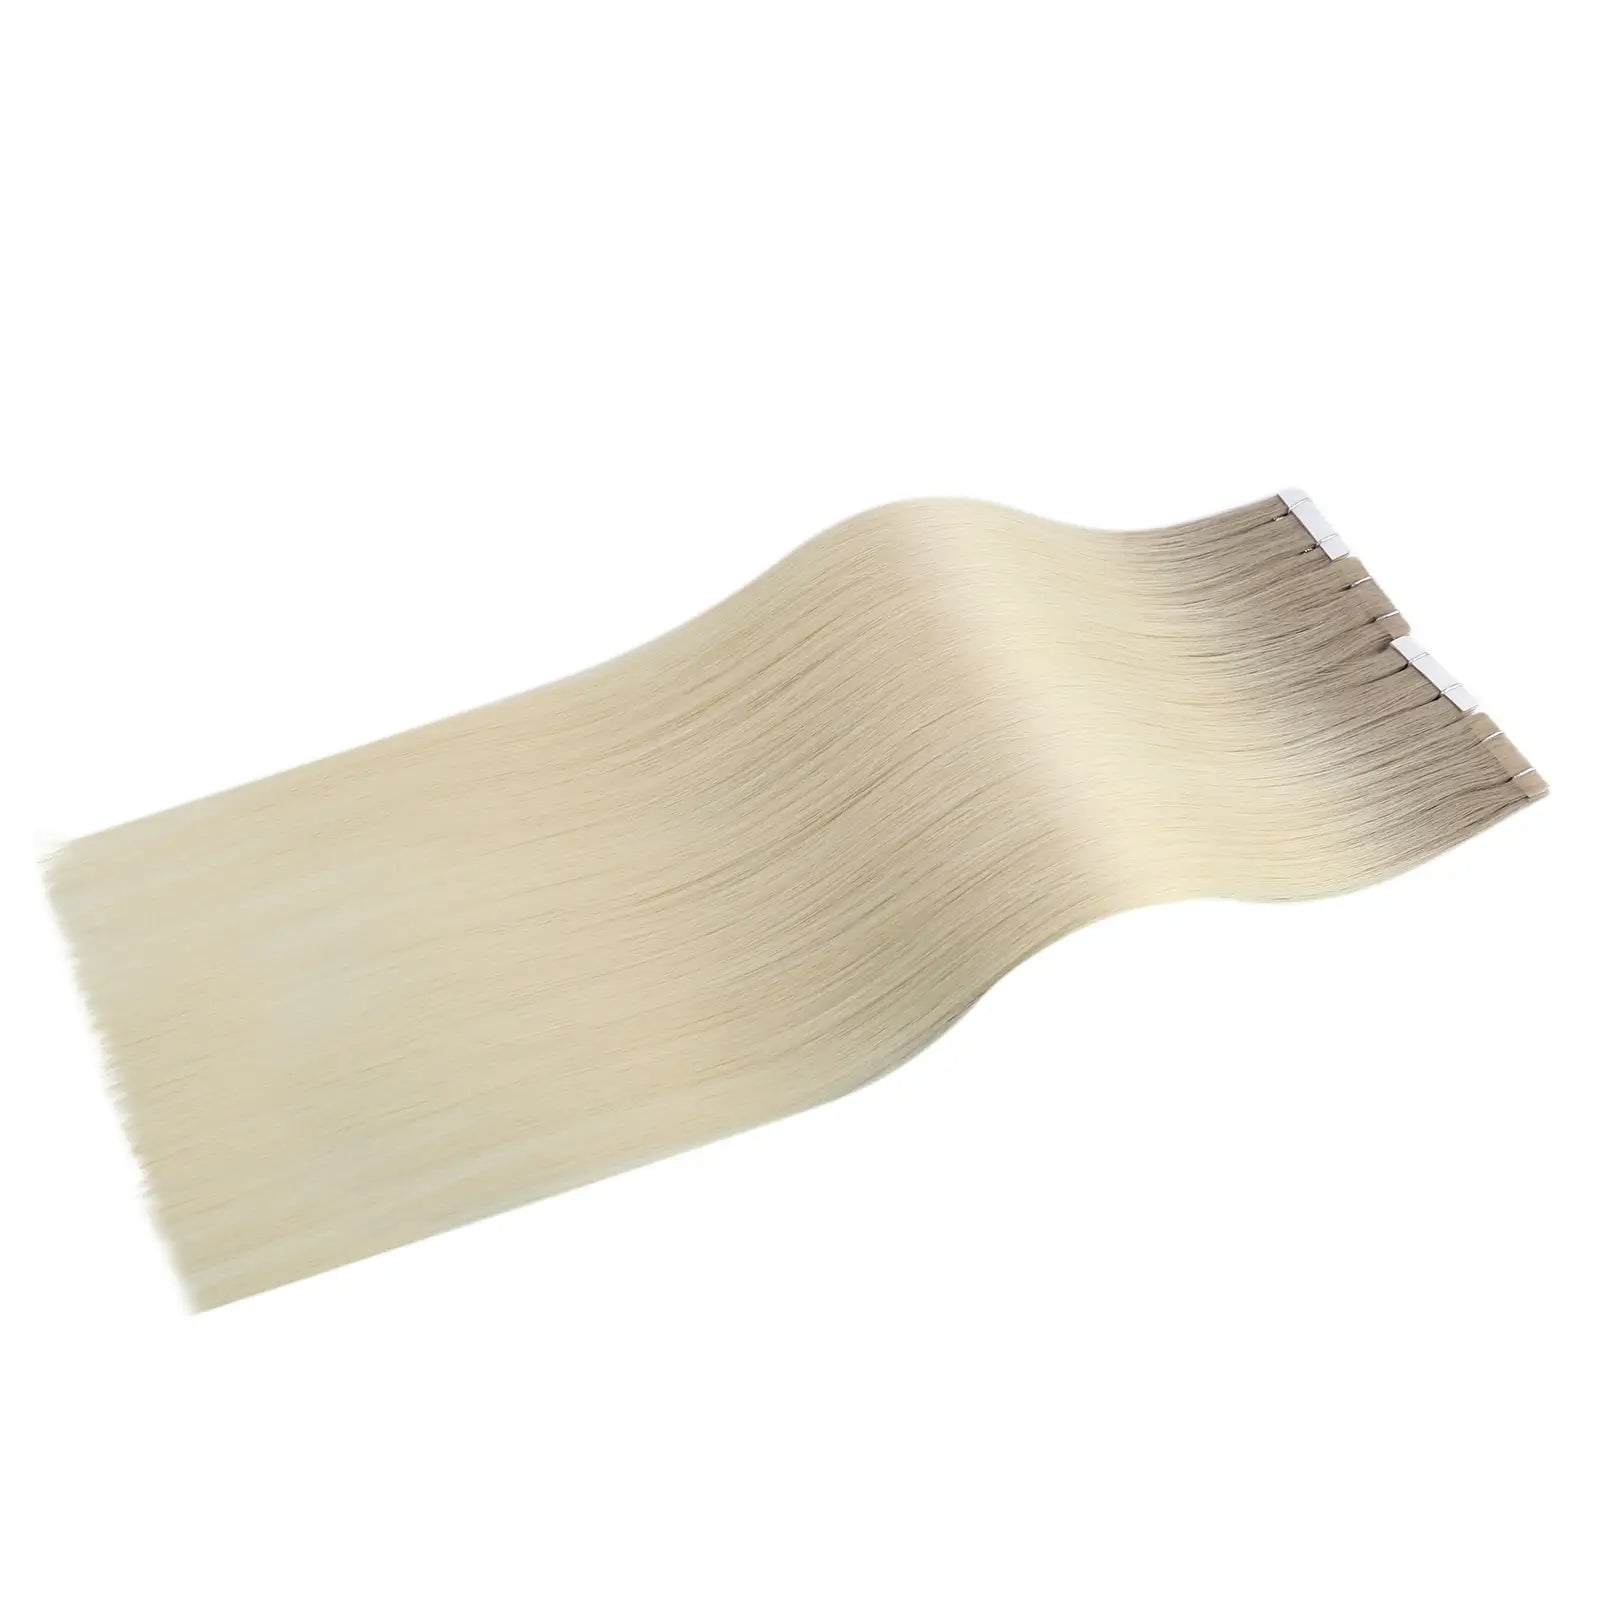 highqualityinjectiontapeinhairextensionforthinninghair